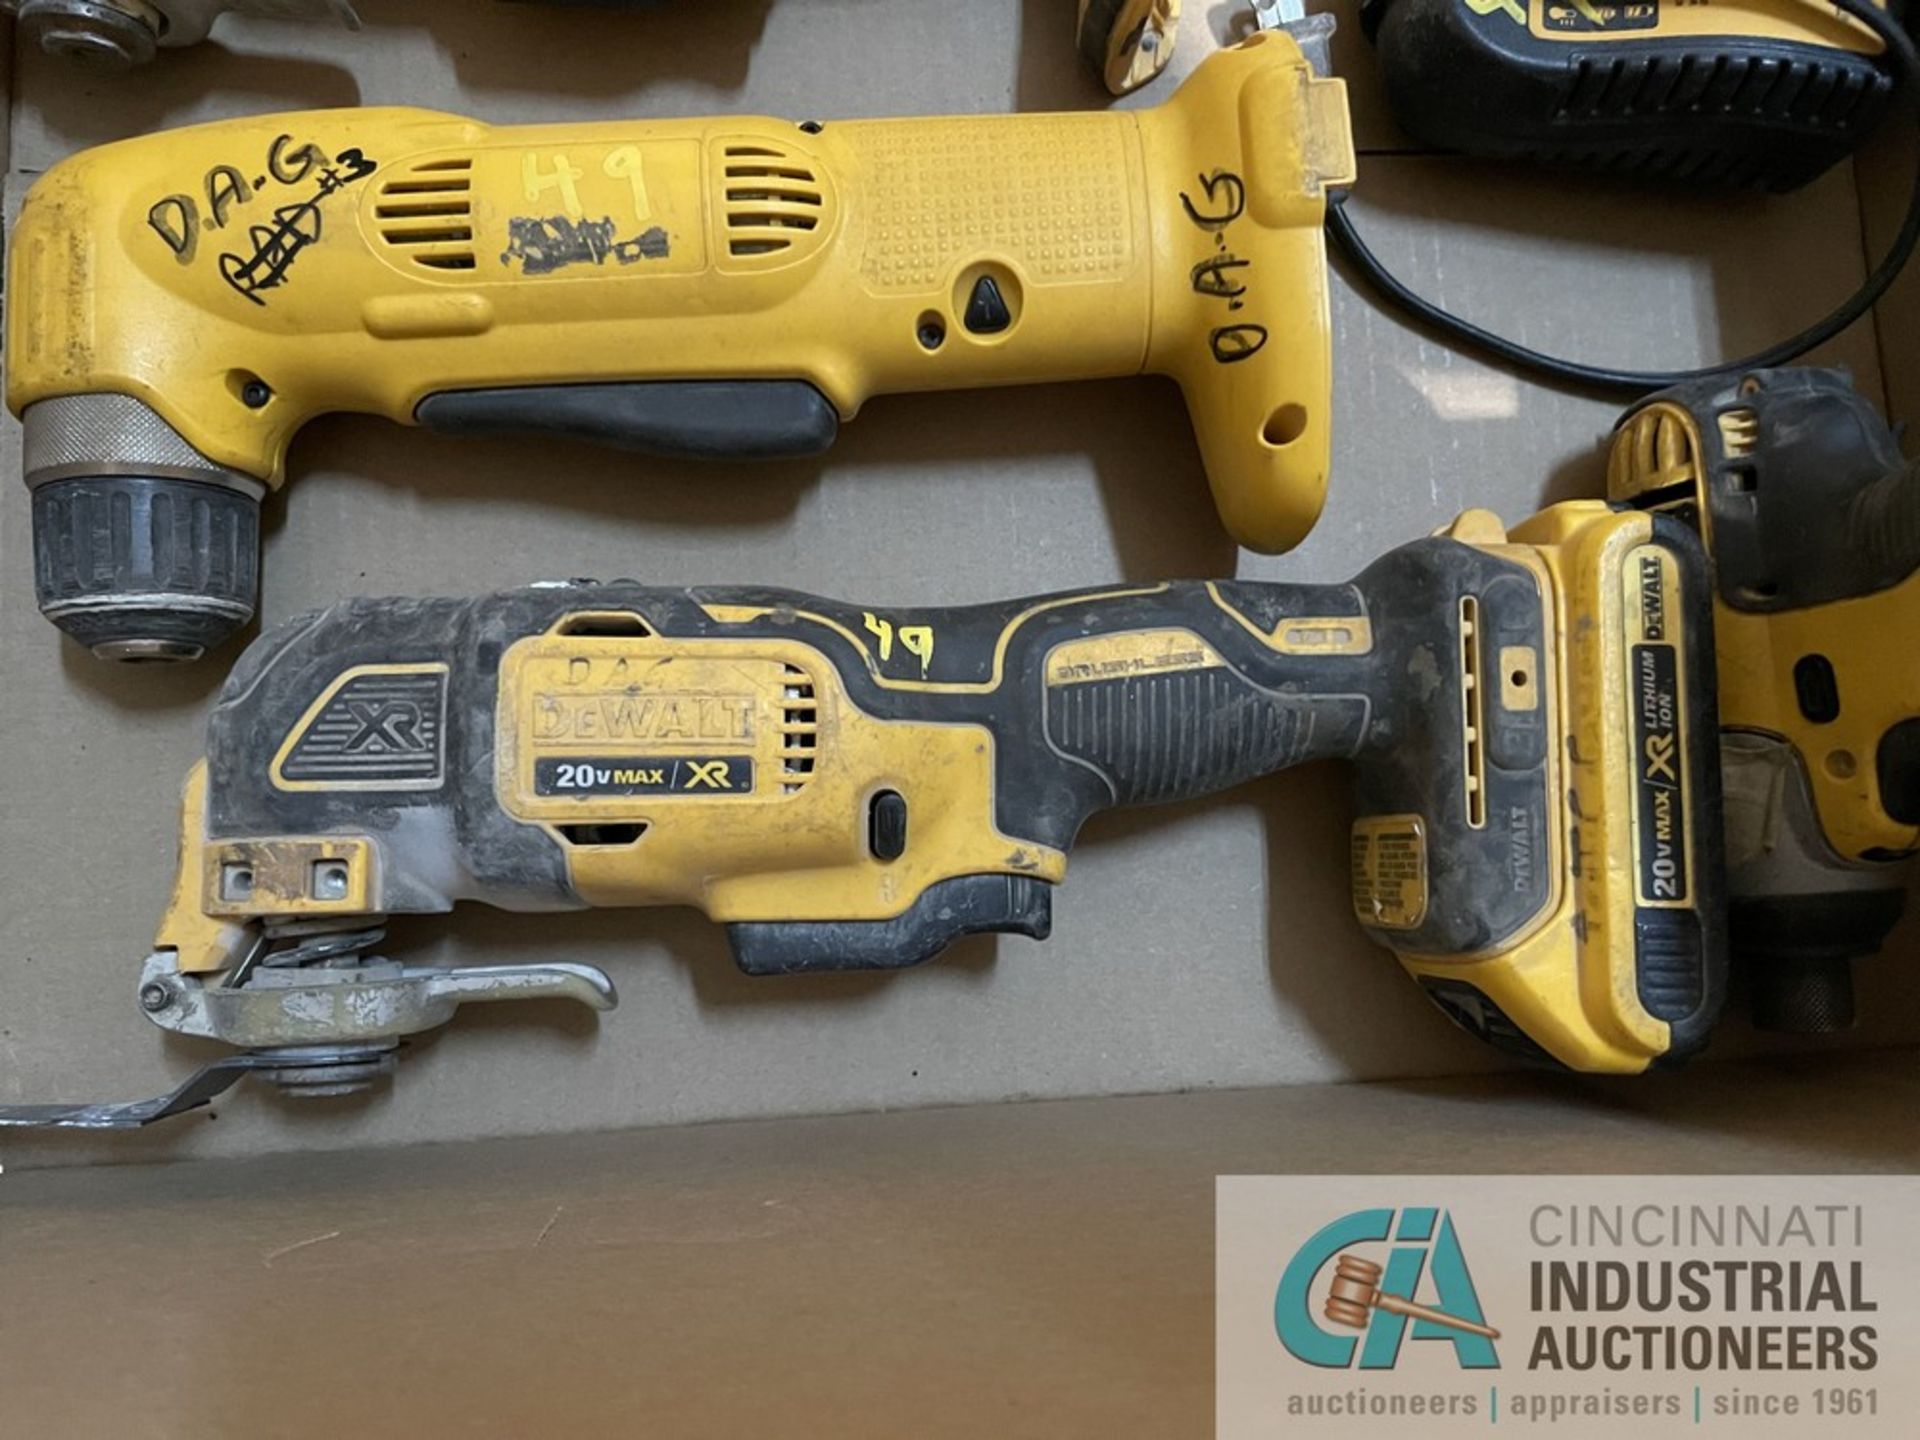 (LOT) MISCELLANEOUS DEWALT CORDLESS POWER TOOLS WITH (3) CHARGERS - Image 2 of 6